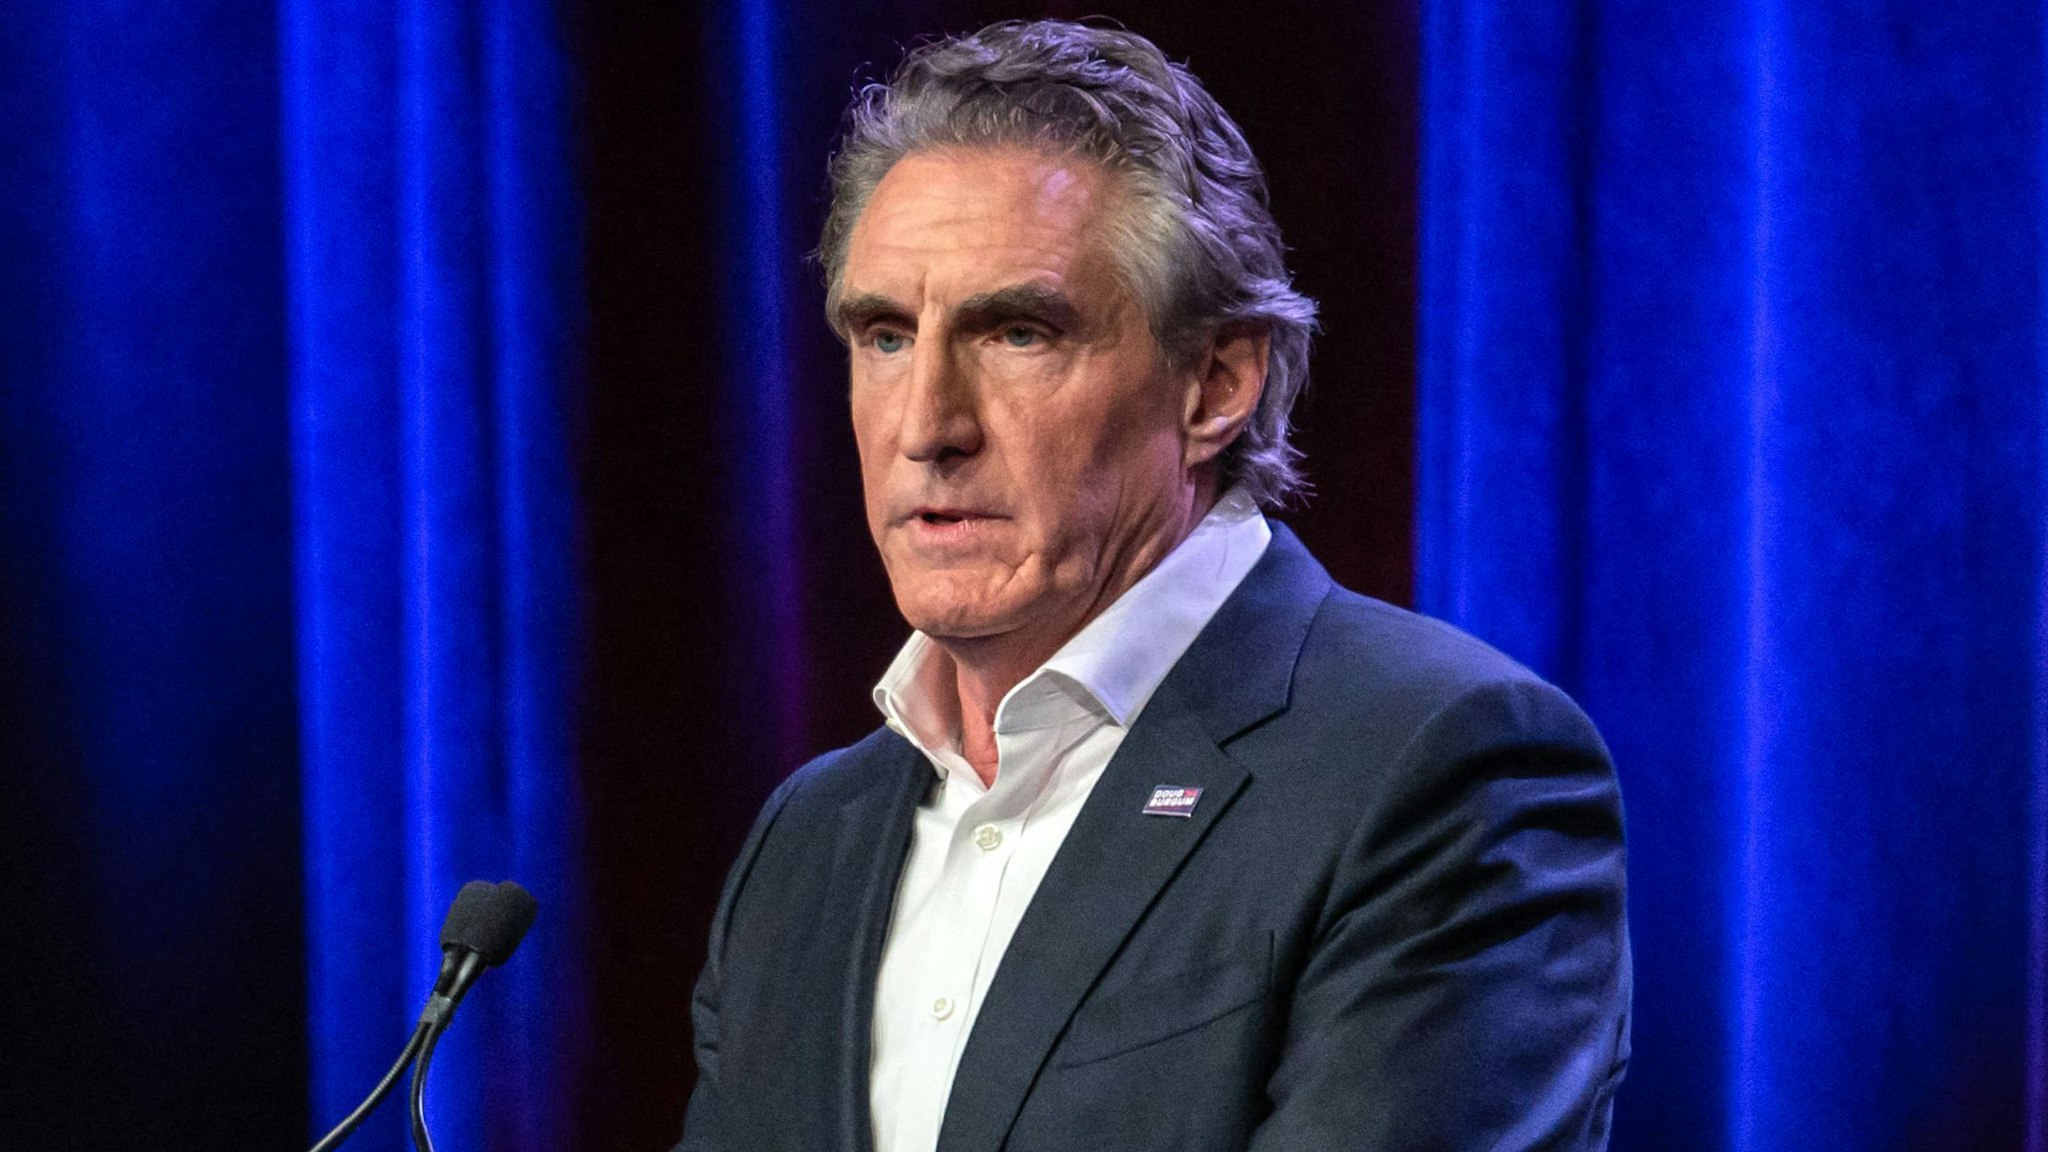 North Dakota governor and 2024 Republican Presidential hopeful Doug Burgum speaks at the Republican Party of Iowa's 2023 Lincoln Dinner at the Iowa Events Center in Des Moines, Iowa, on July 28, 2023.